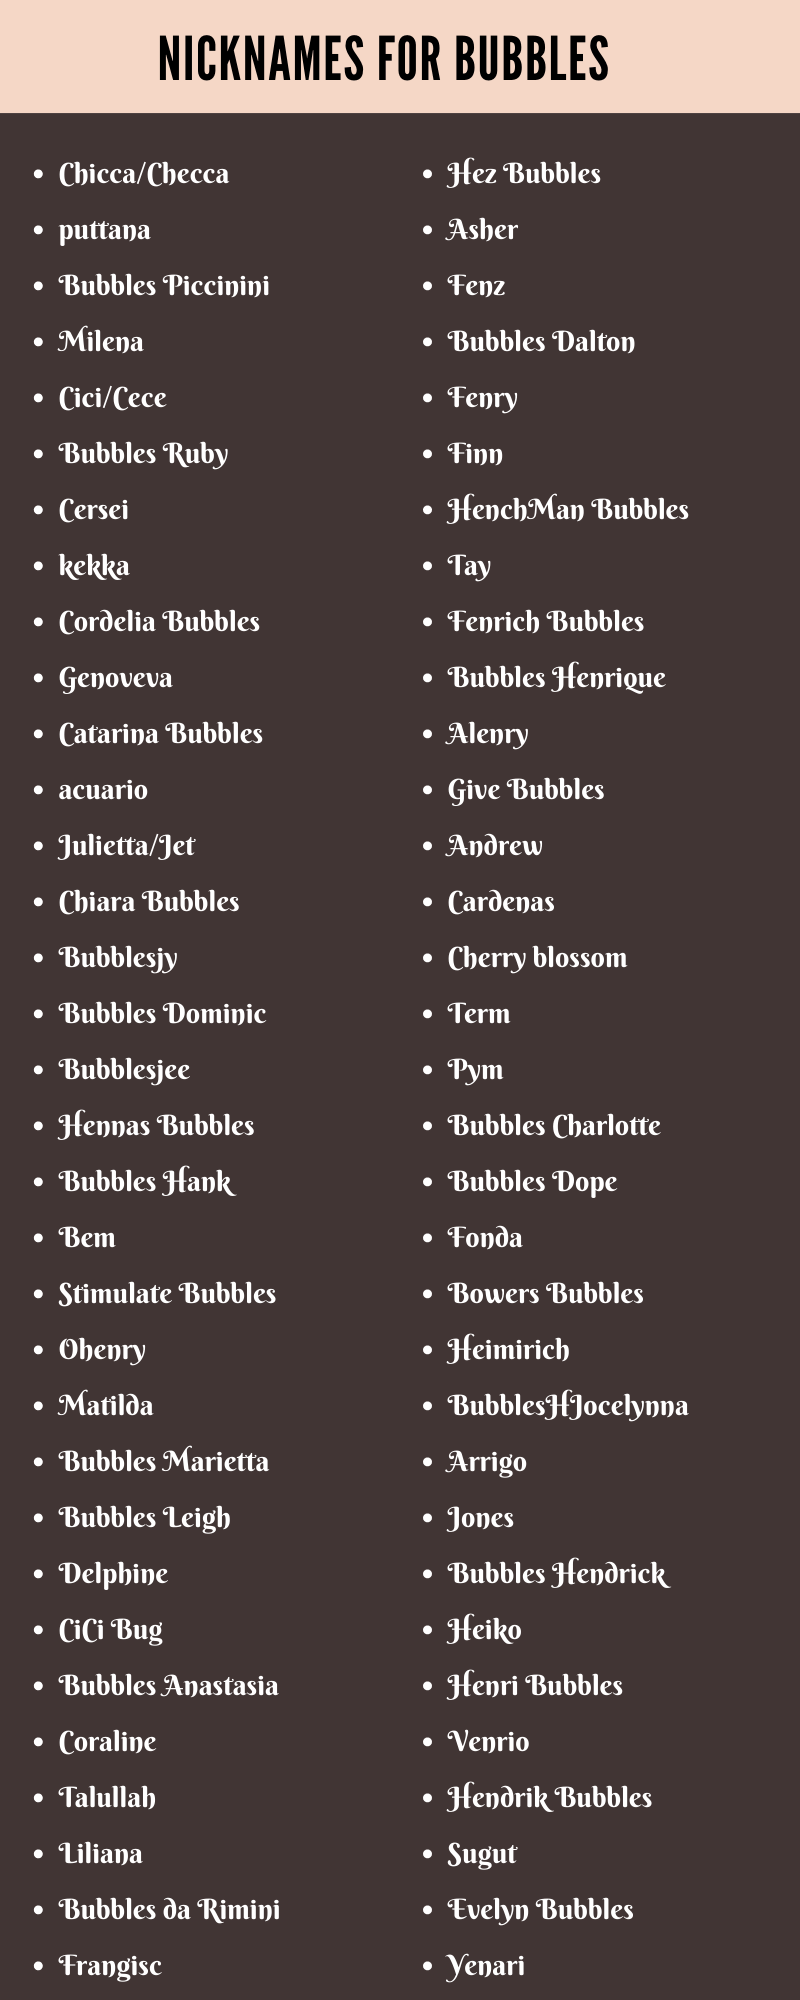 Nicknames For Bubbles